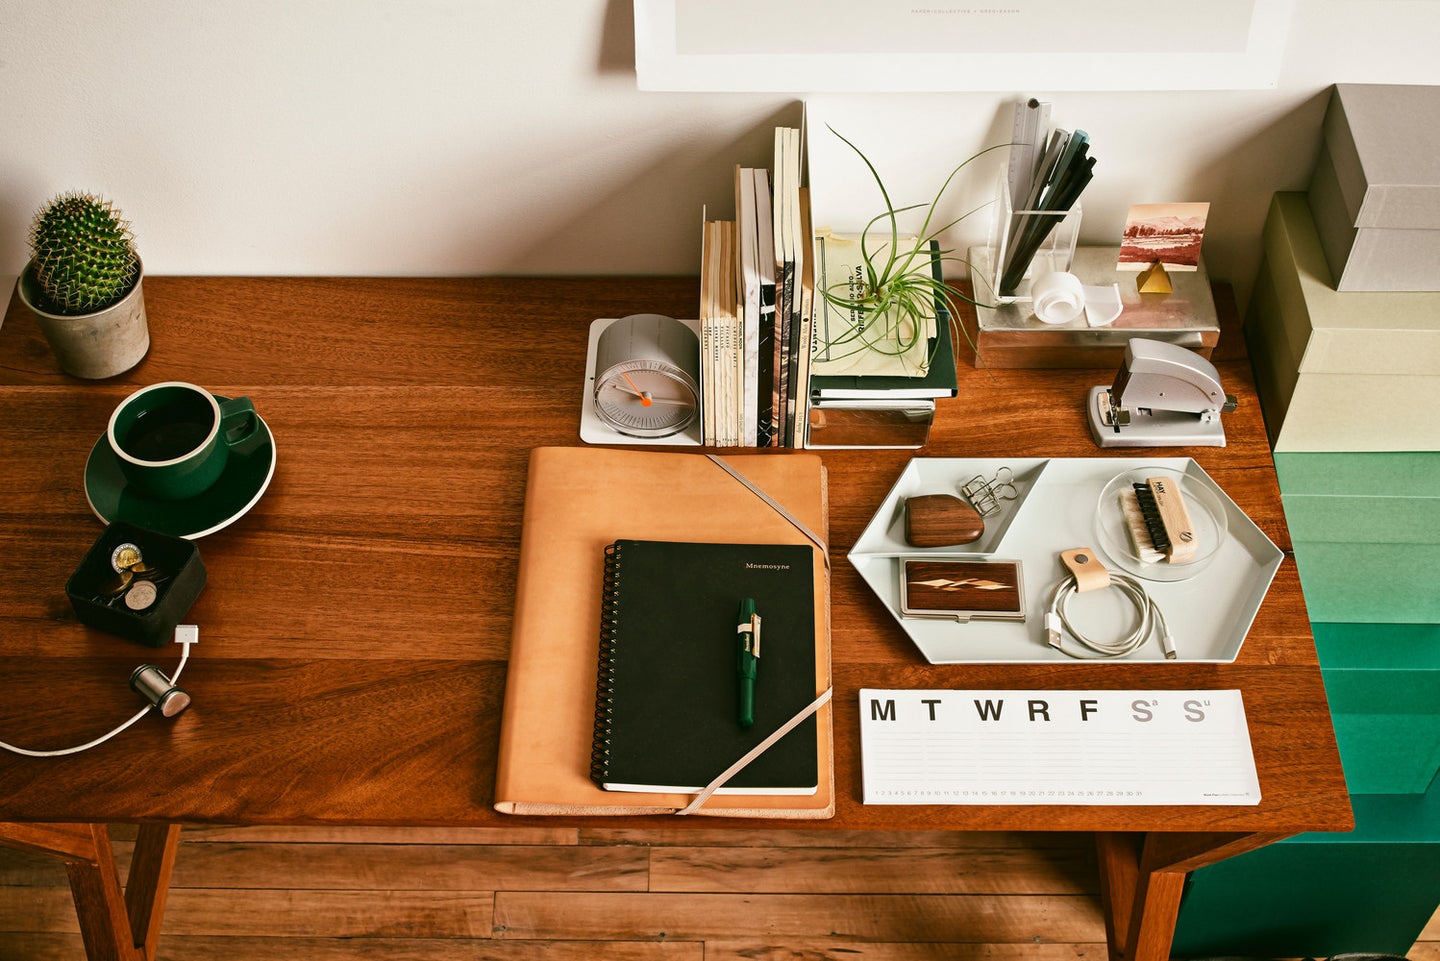 9 Items You Need to Spruce Up Your Desk intro